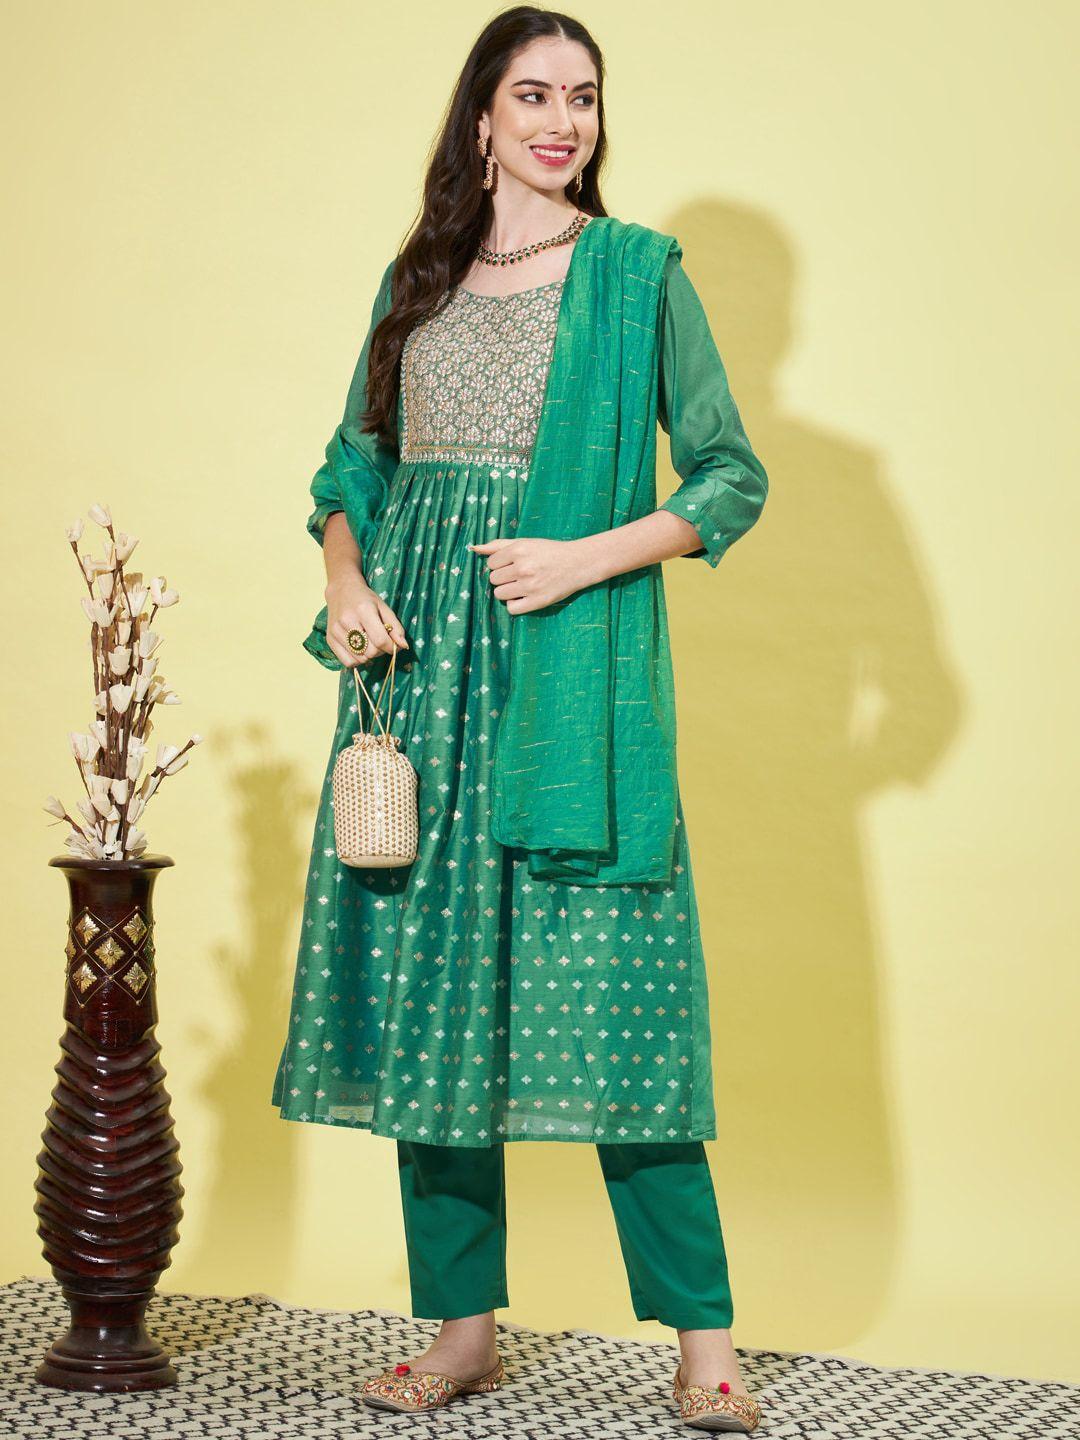 vredevogel floral embroidered chanderi silk kurta with trousers & with dupatta